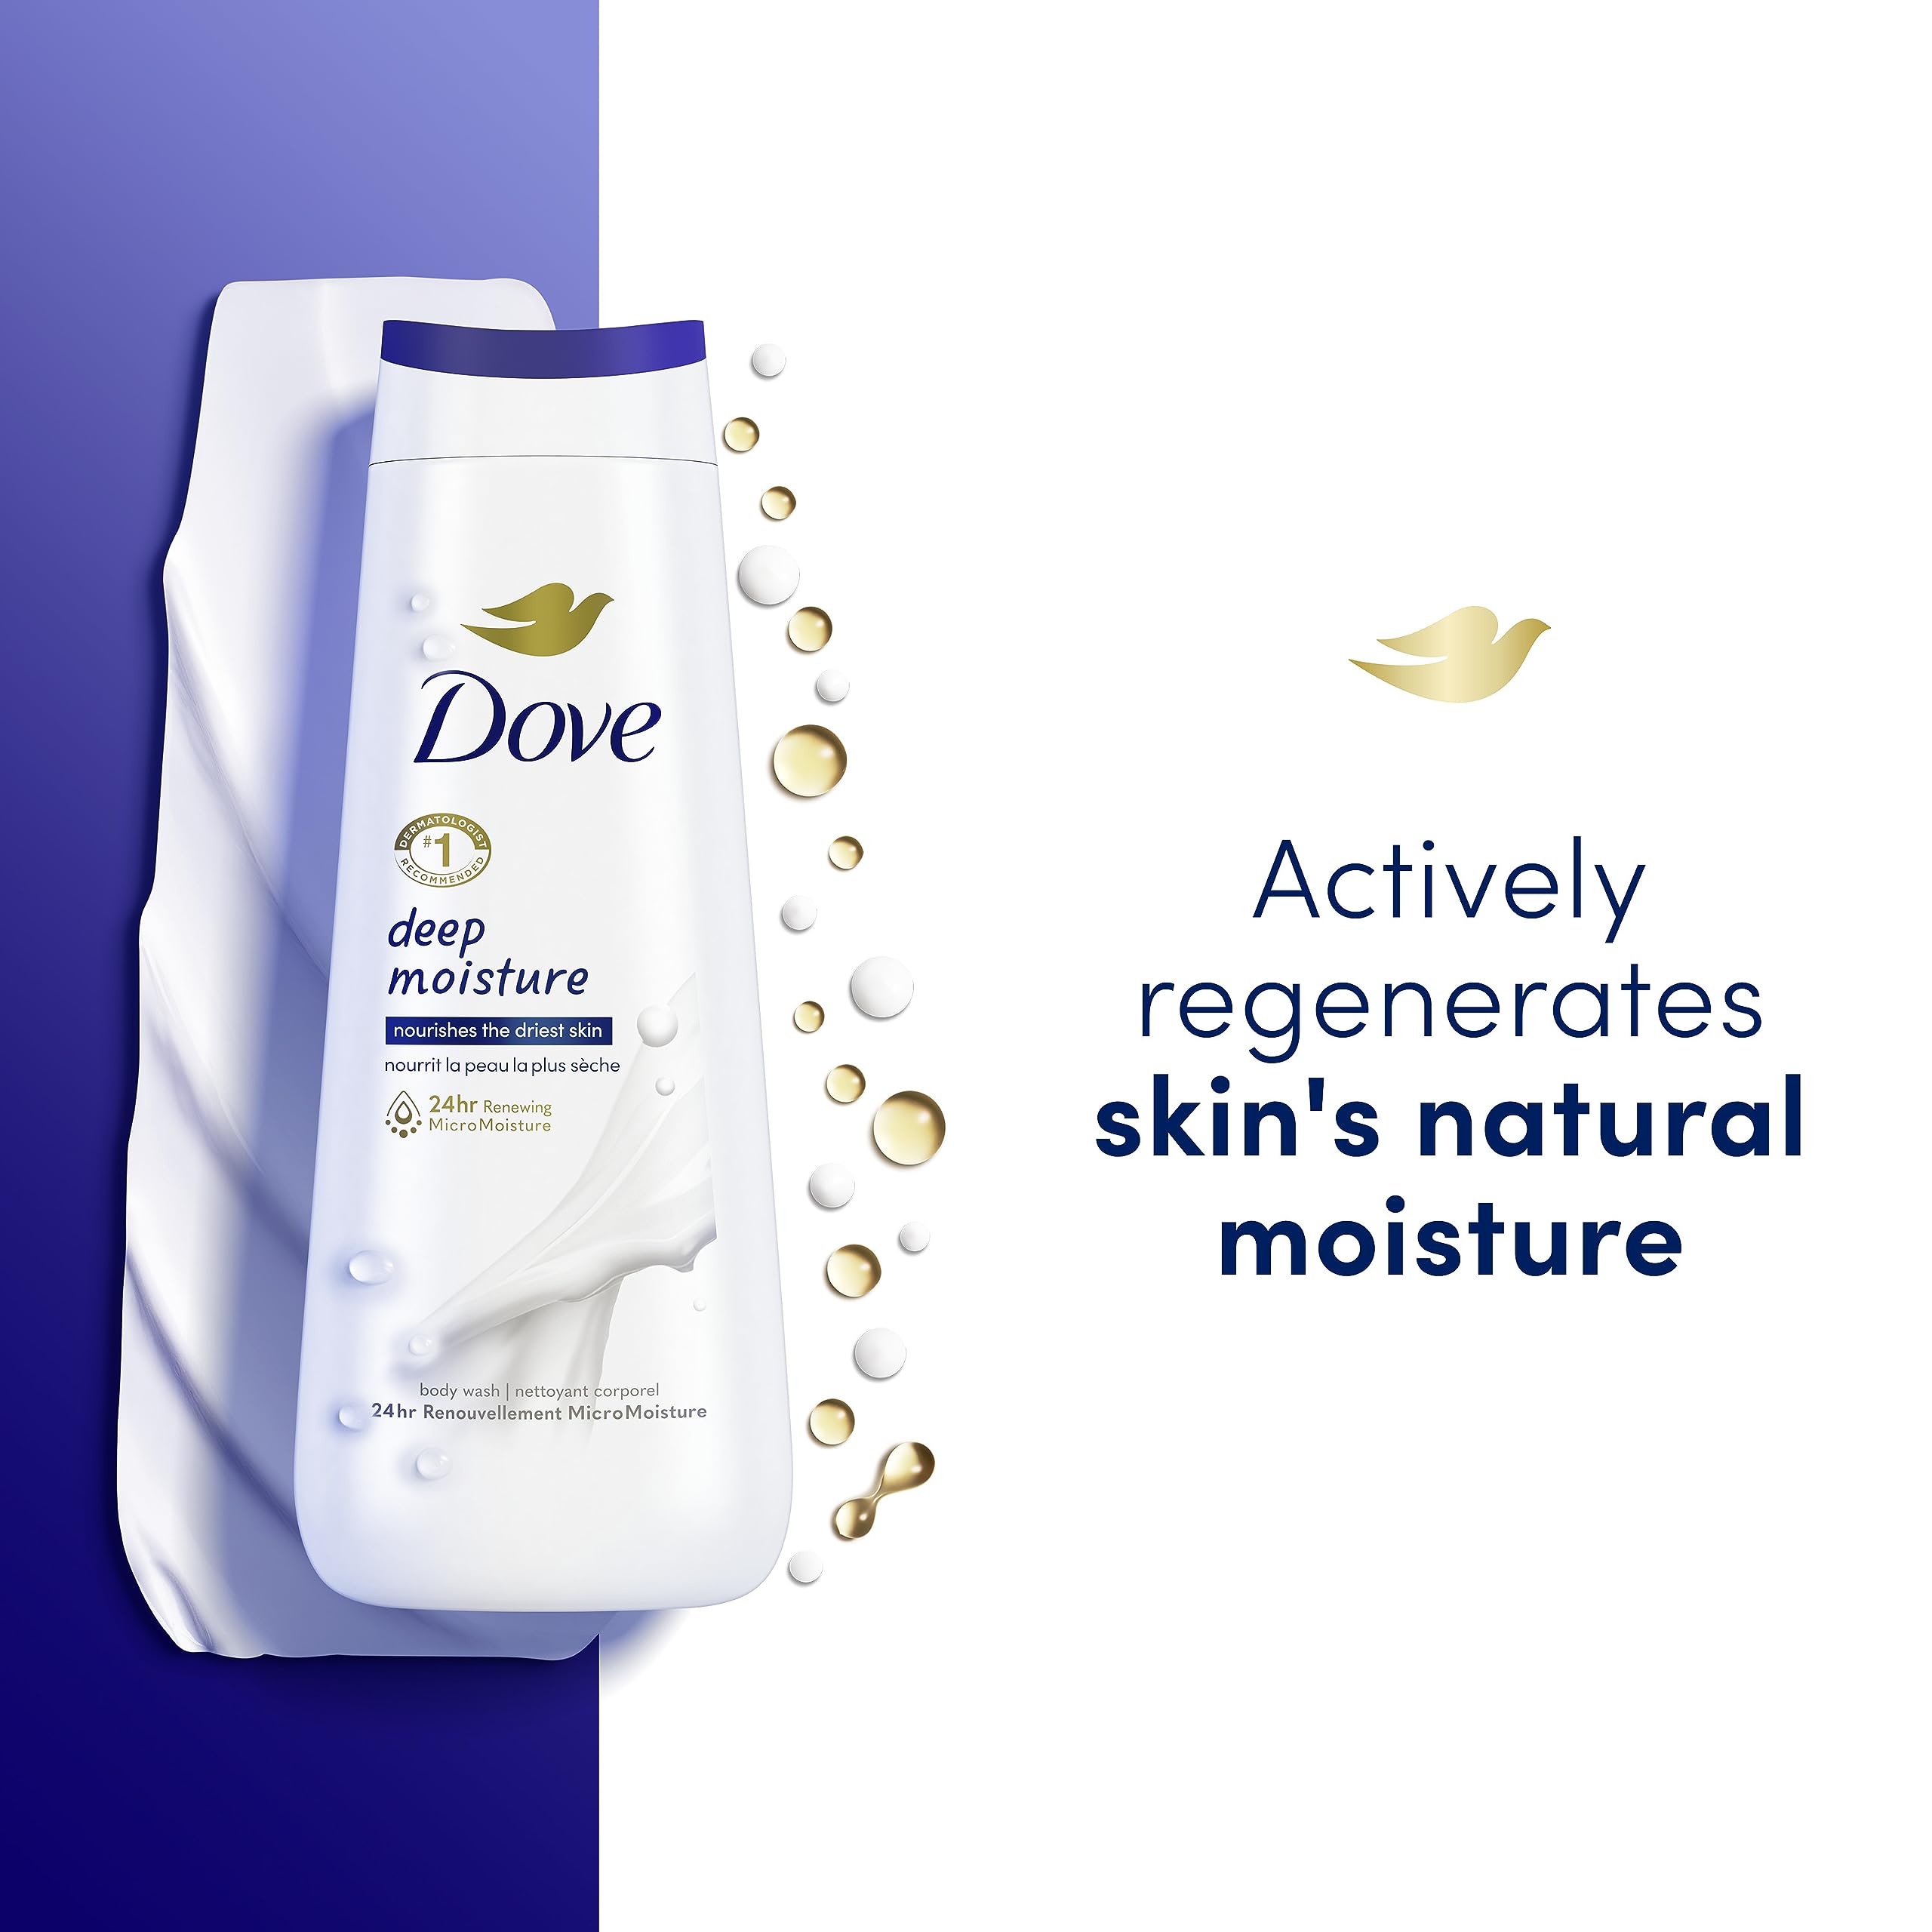 Dove Body Wash Deep Moisture, Sensitive Skin, Cucumber and Green Tea, and Shea Butter & Vanilla Collection 4 Count Skin Cleanser with 24hr Renewing MicroMoisture 20 oz